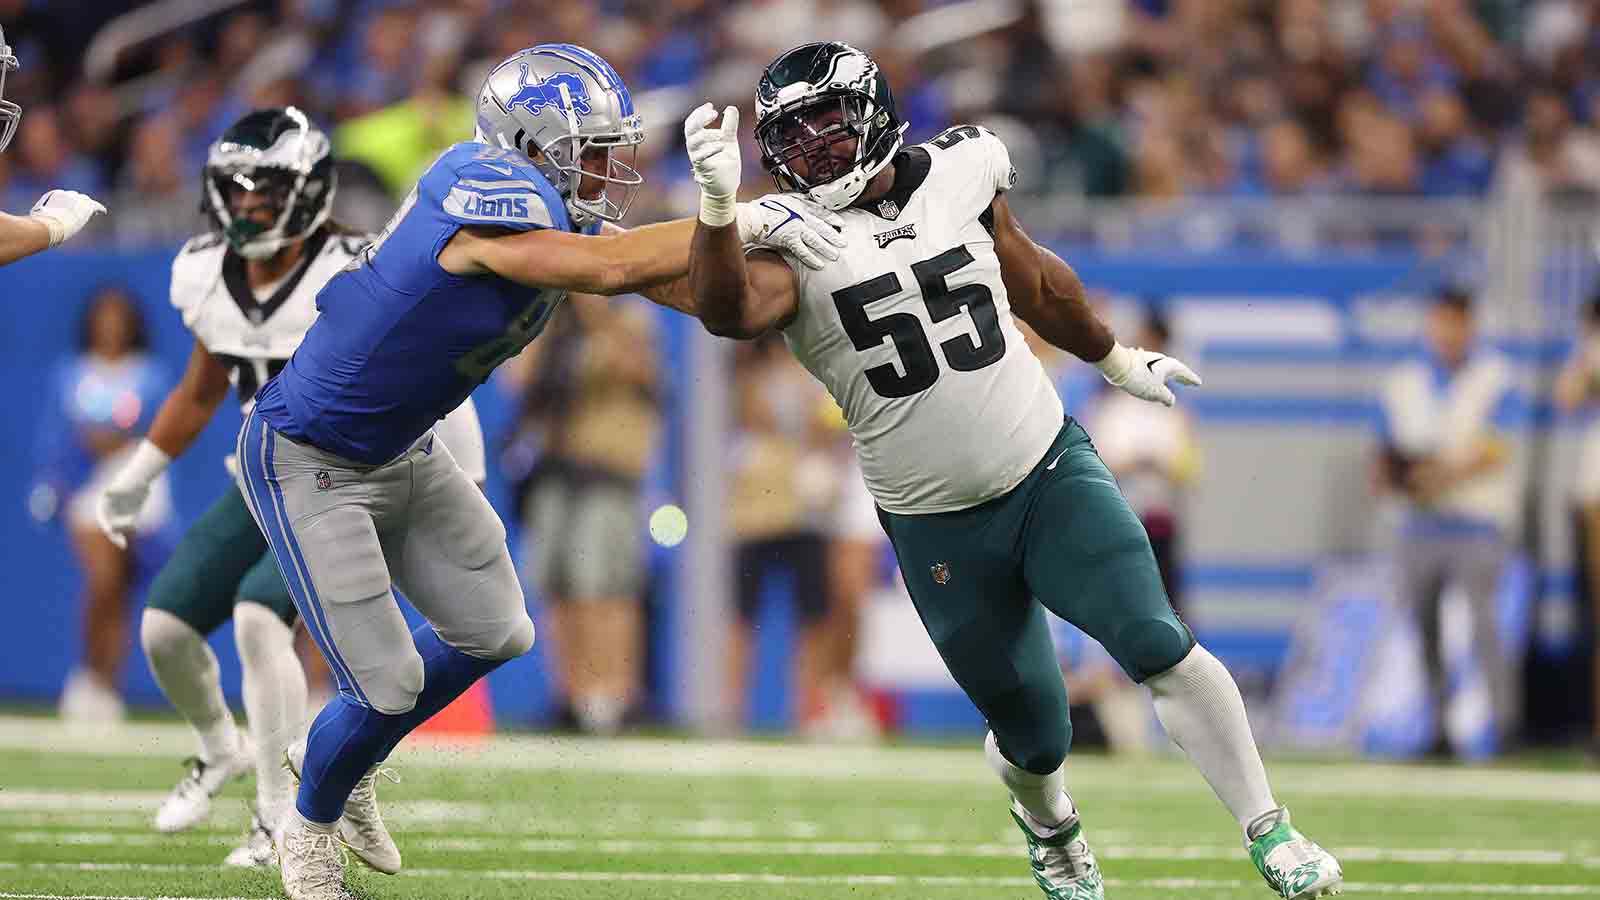 Can Eagles Get Their Pass Rush Going Vs. Vikings?